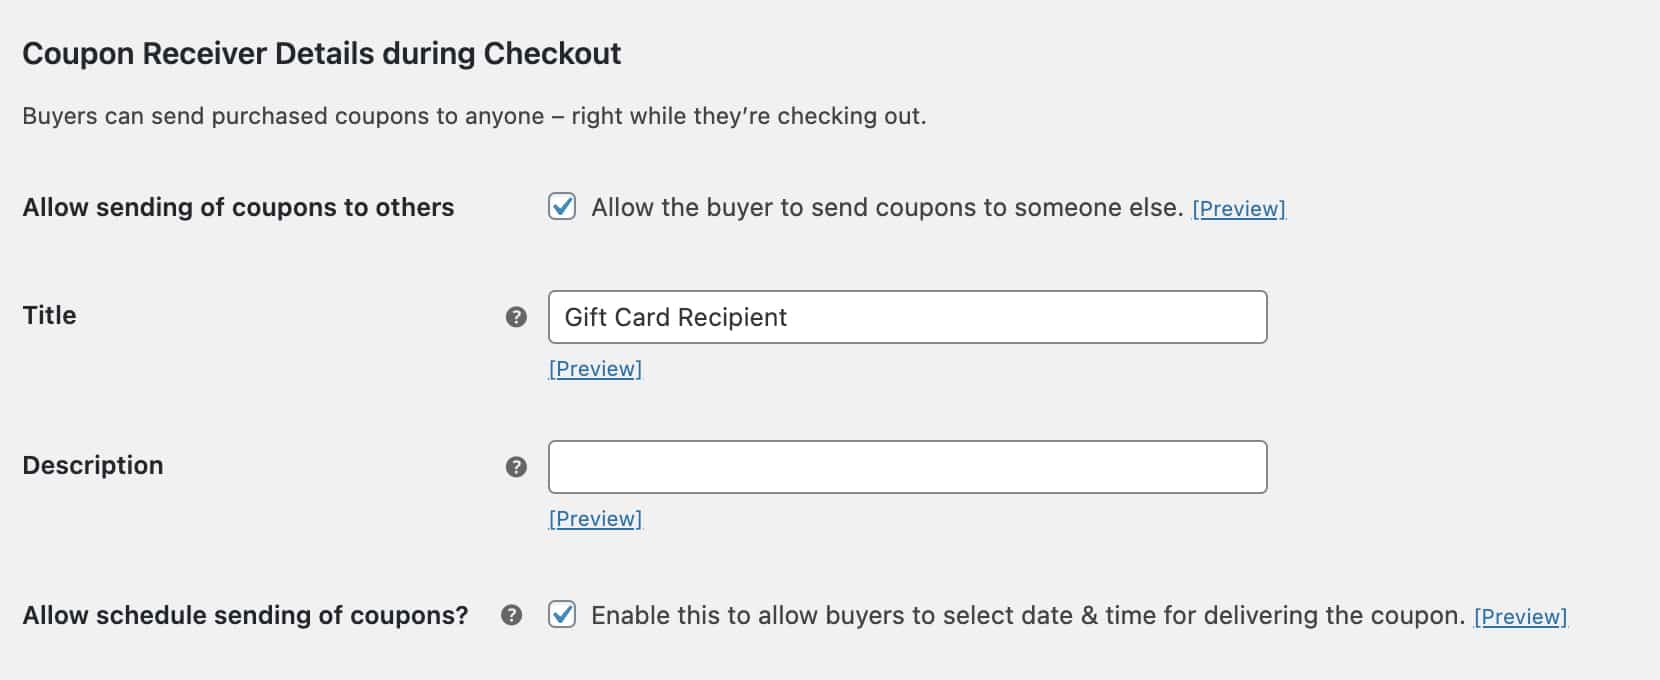 It is important to allow buyers to choose the date they send their gift cards